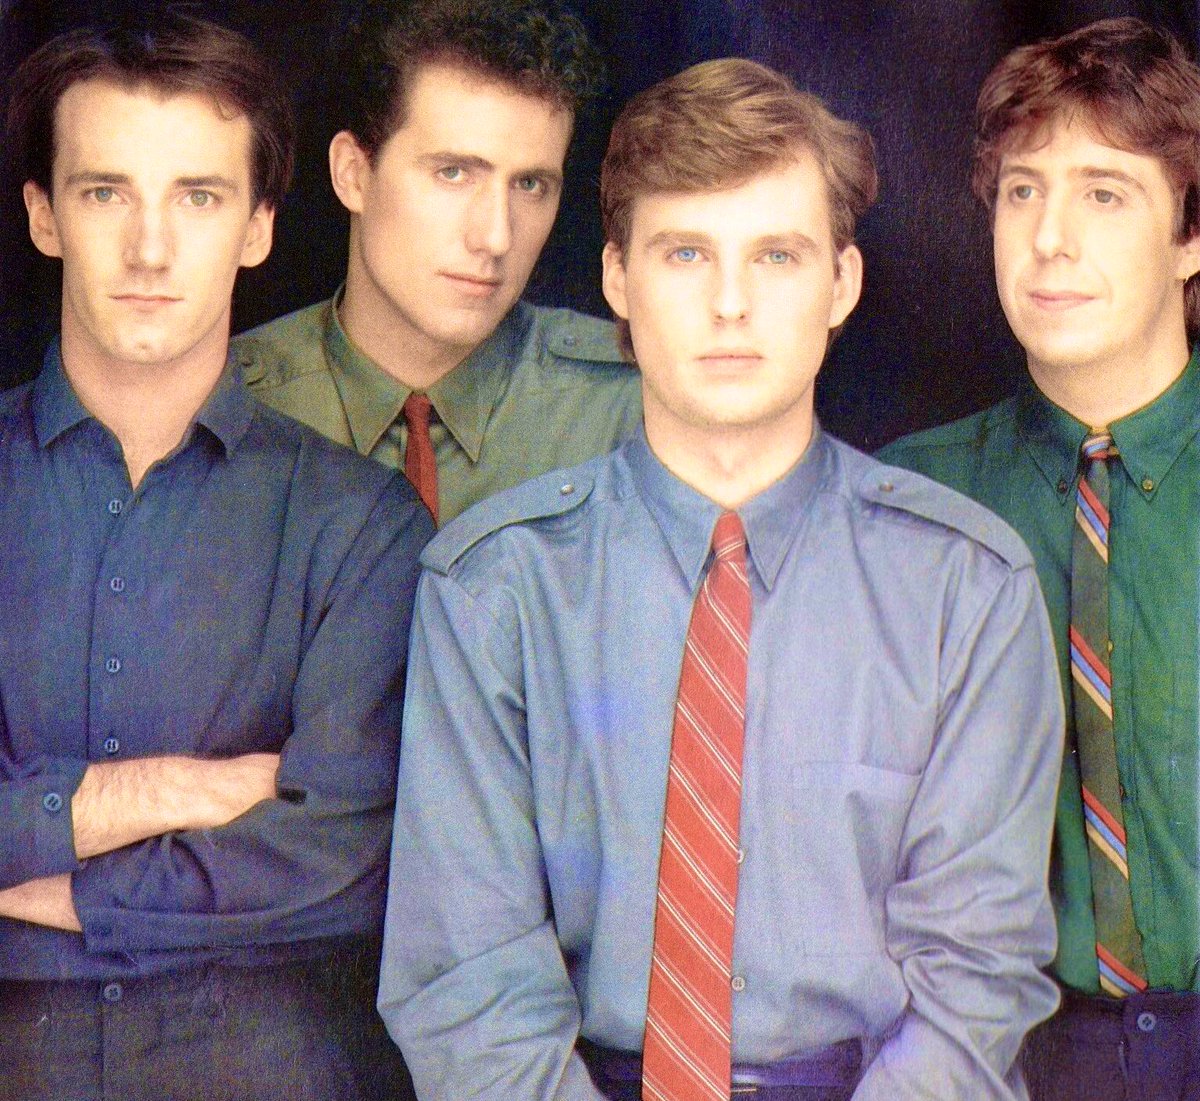 Happy 64th birthday to #AndyMcCluskey - lead singer and bass guitarist of Orchestral Manoeuvres in the Dark.

What are your favorite OMD songs?